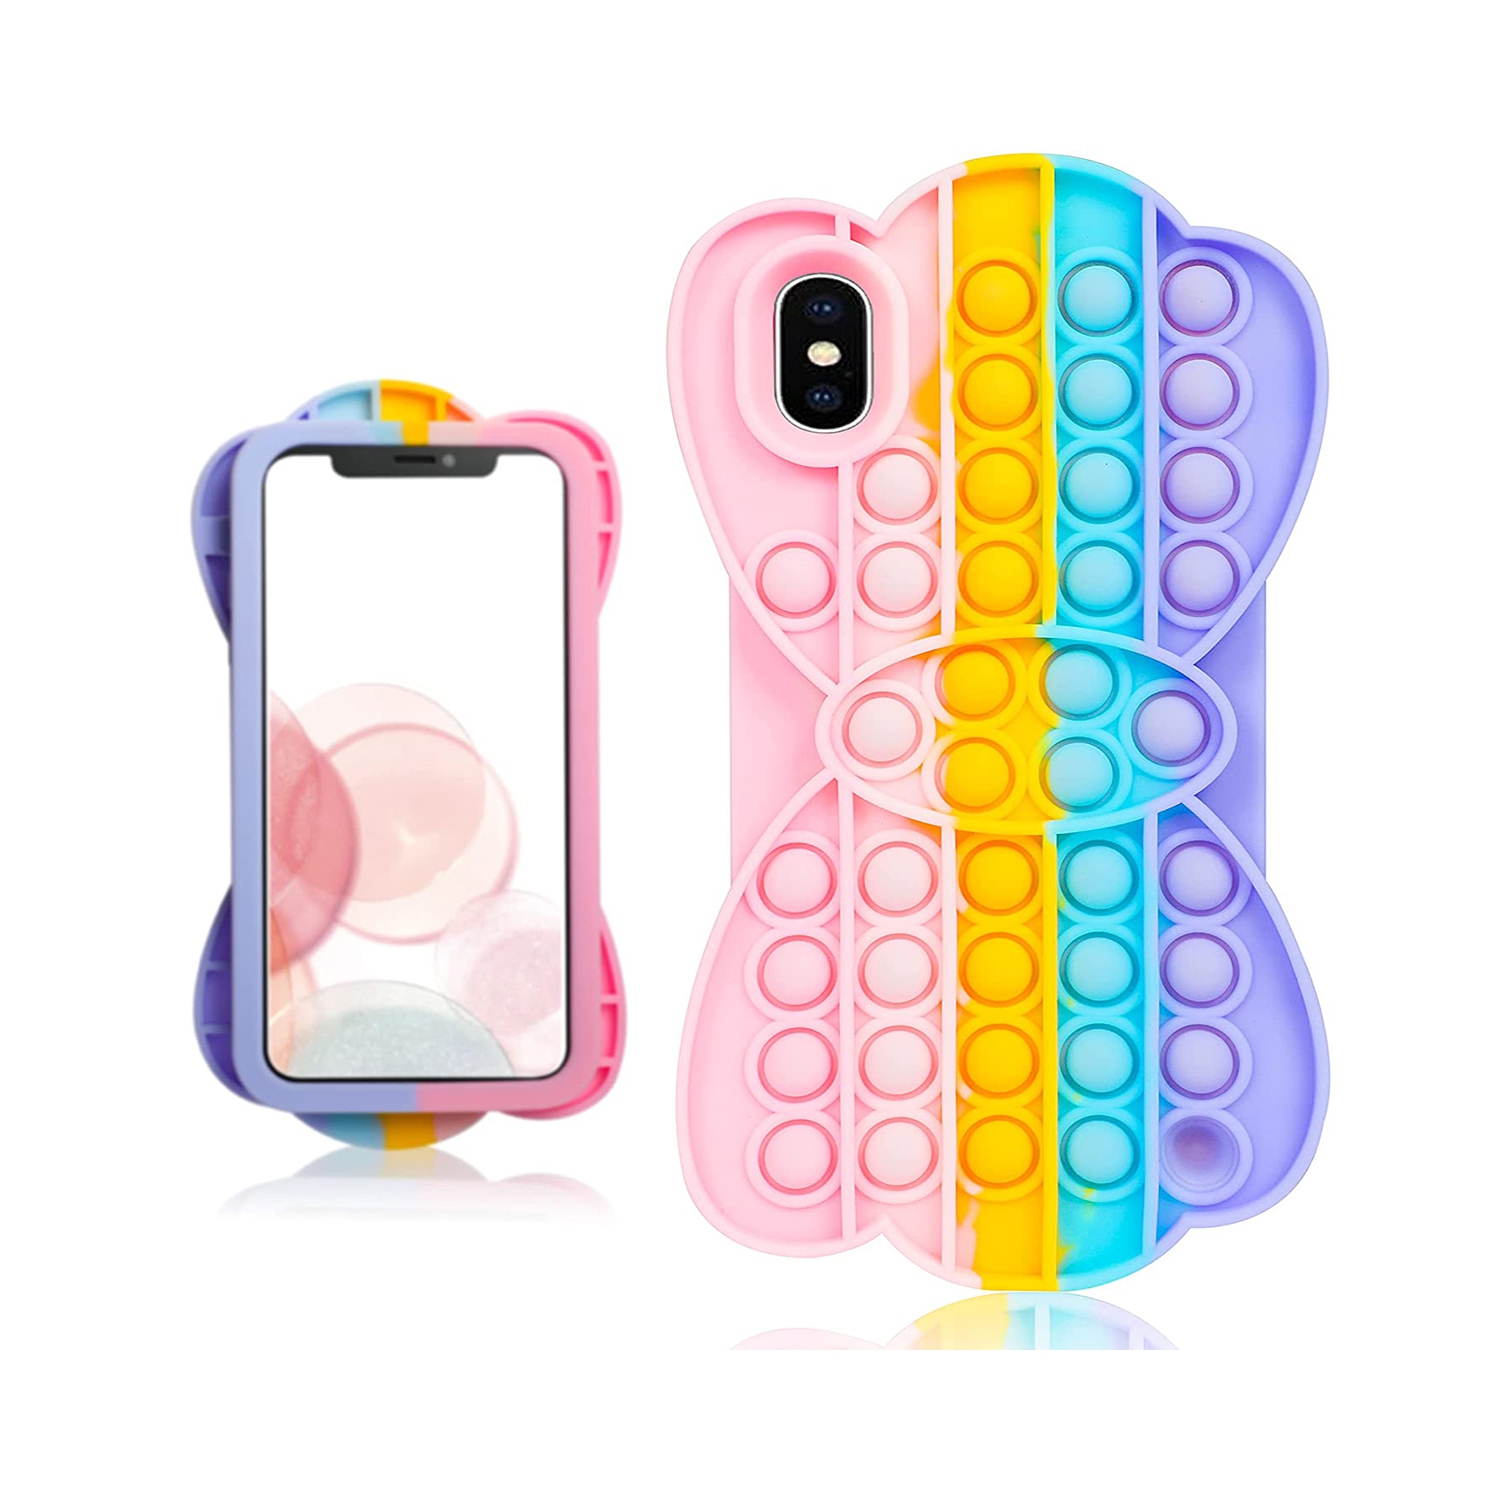 Cute Fun Style Pop Fidget Toy Soft TPU Silicone Protective Case Cover For Apple iPhone XS Max - Rainbow